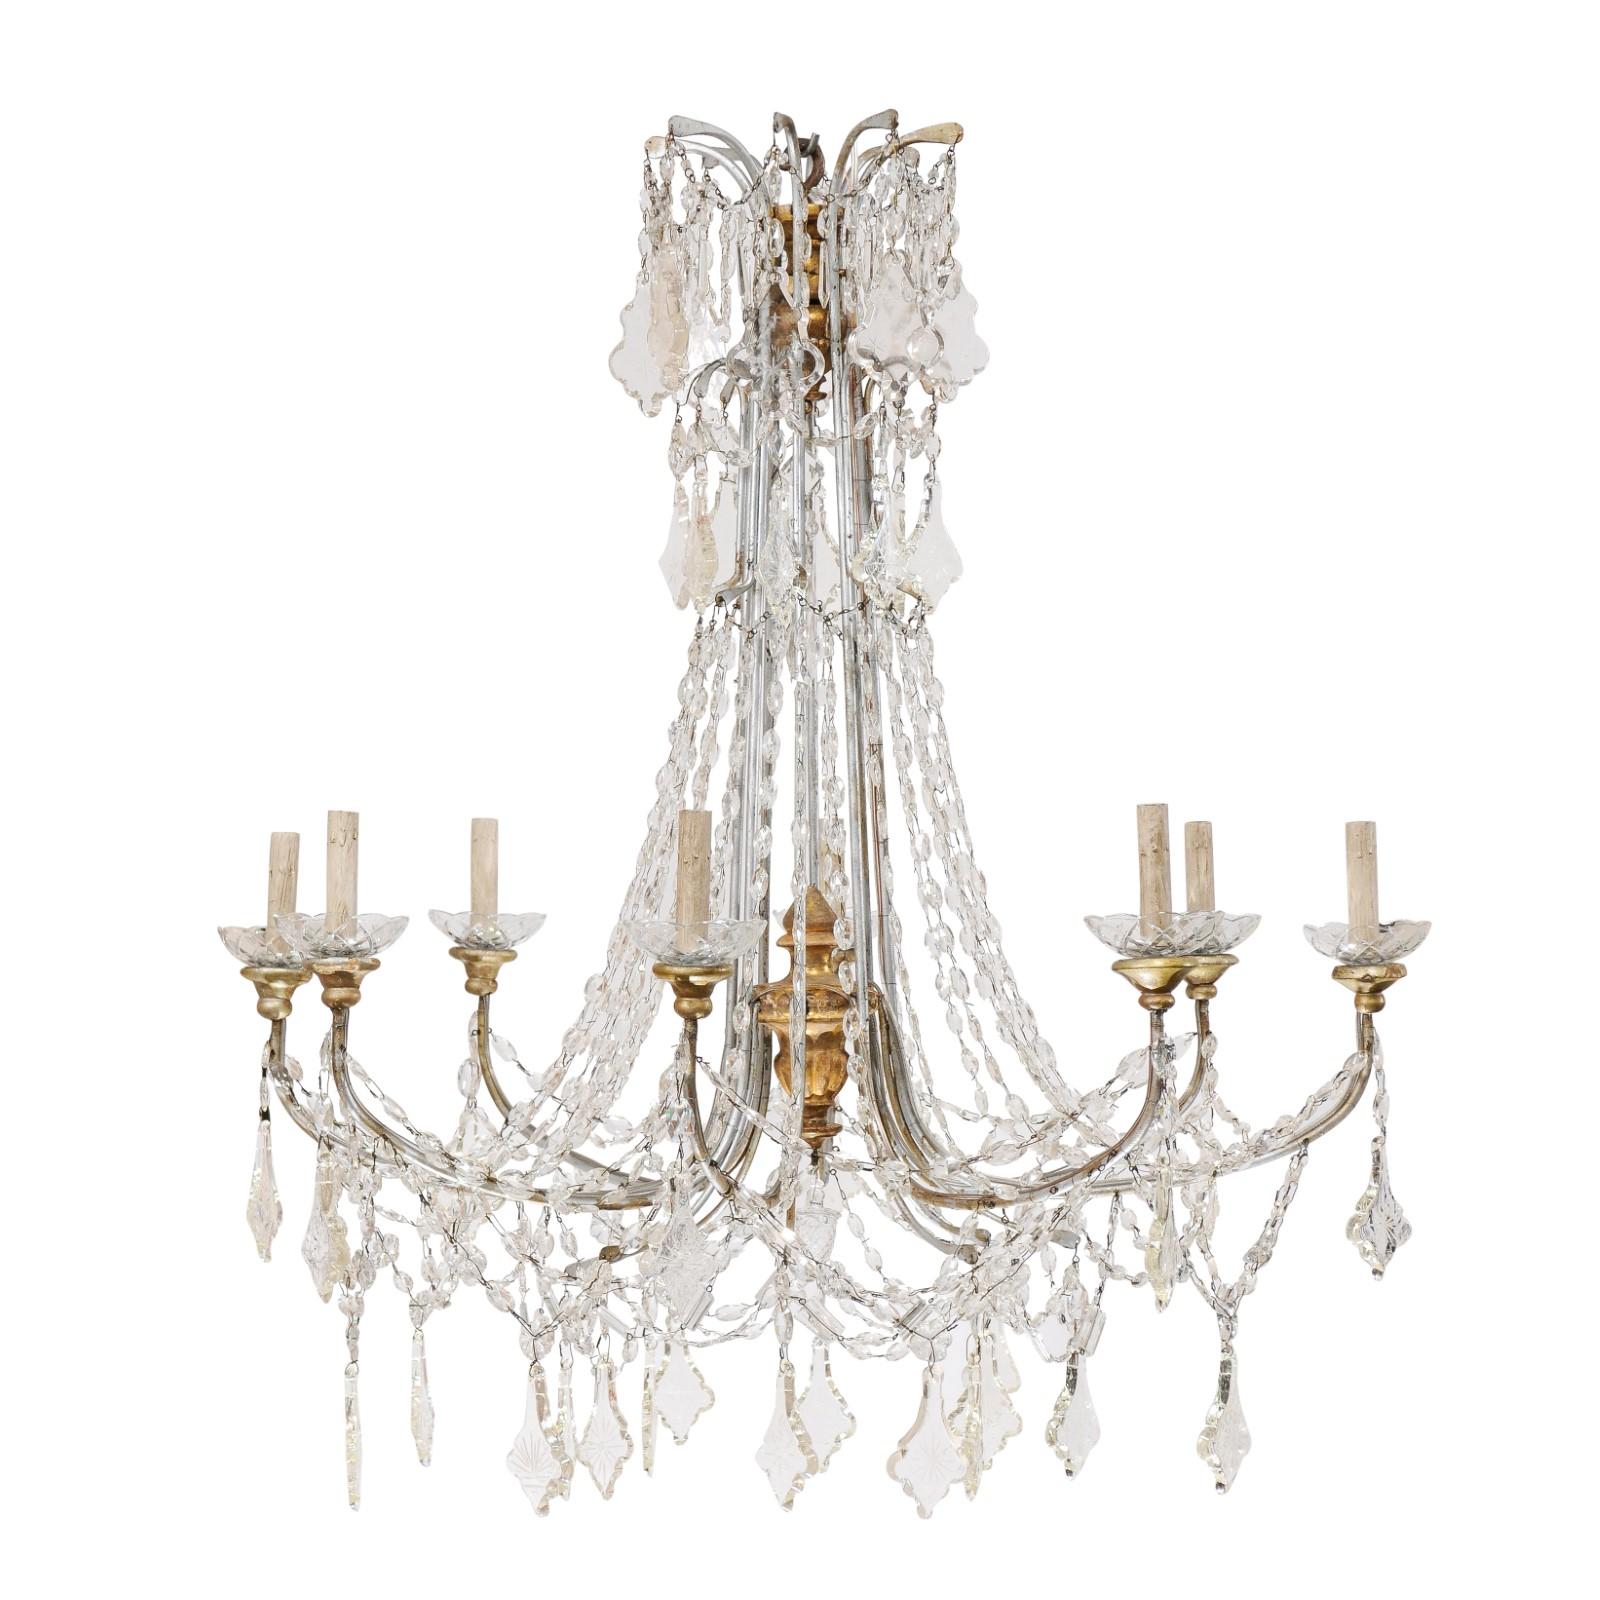 Italian Crystal Eight-Light Chandelier w/ Two-Tiered Waterfall Top, Mid-20th C.